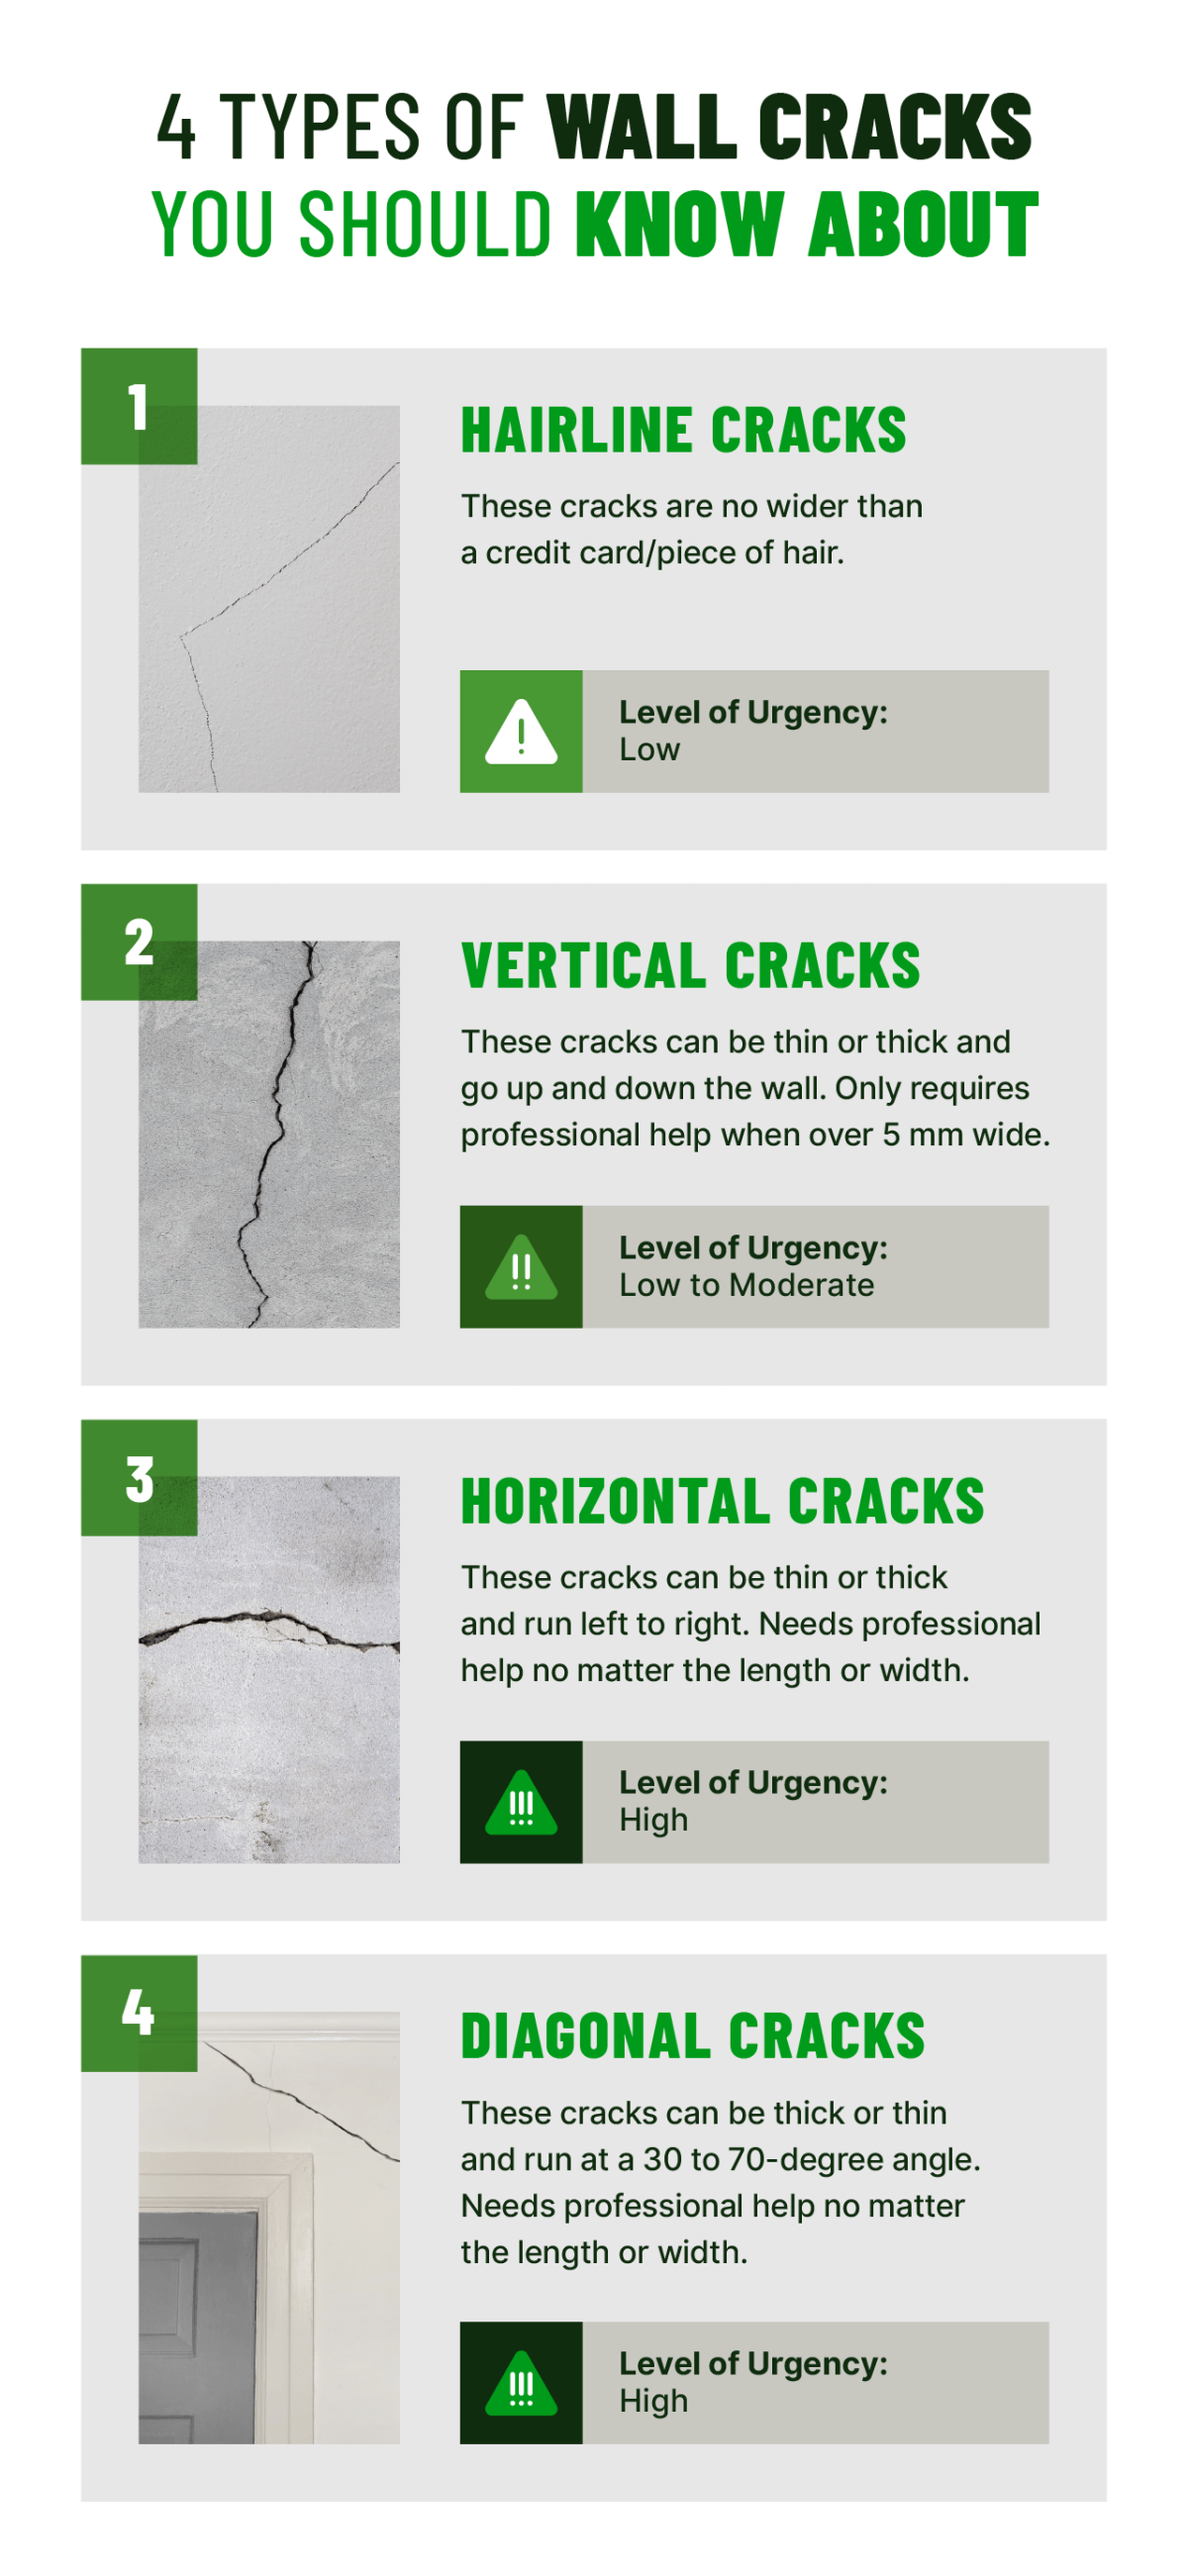 4 types of wall cracks you should know about